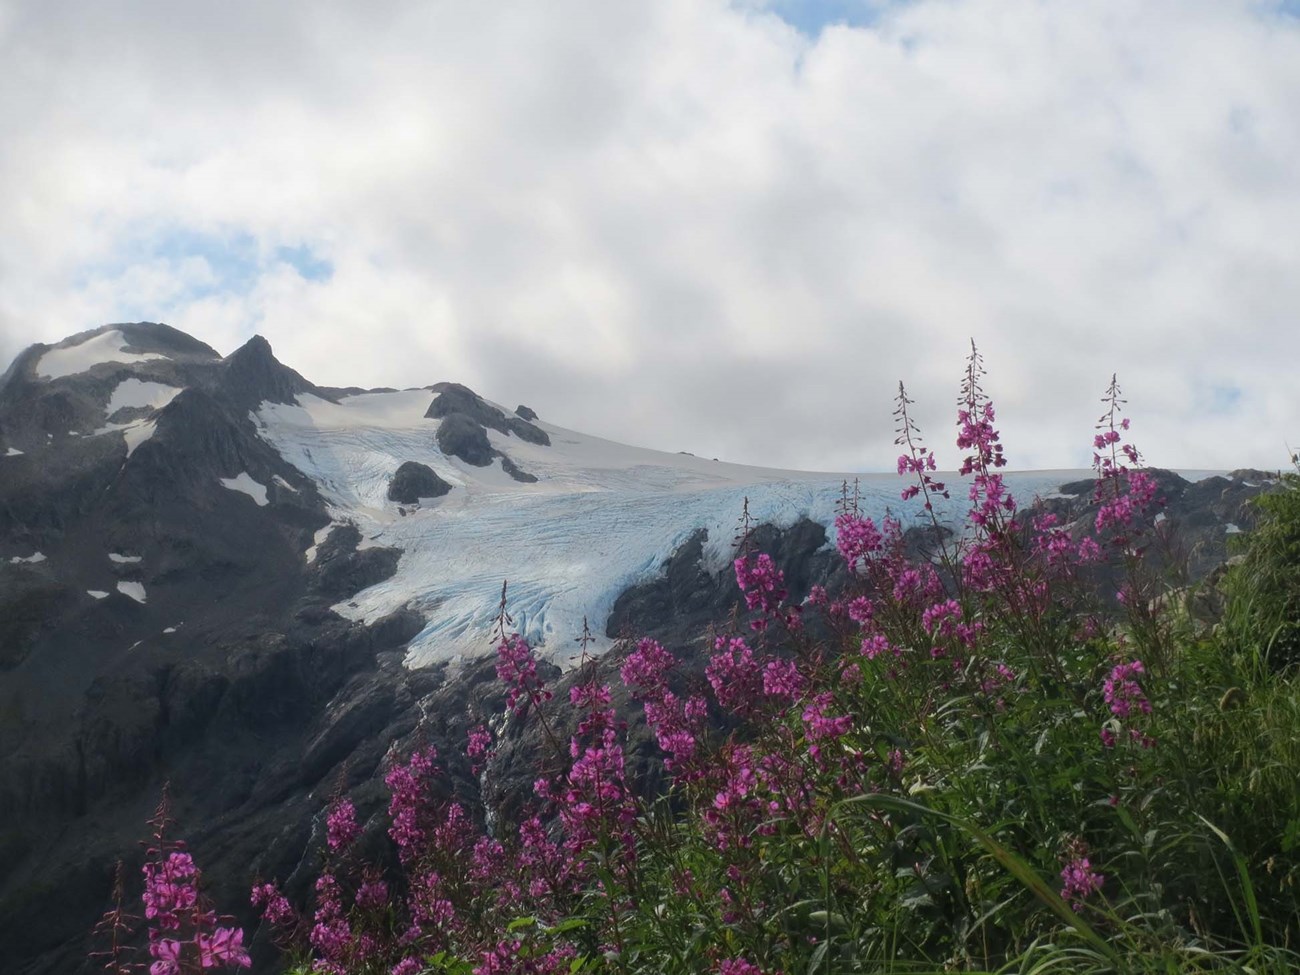 Purple fireweed flowers with a snow covered glacier and mountain in the background.